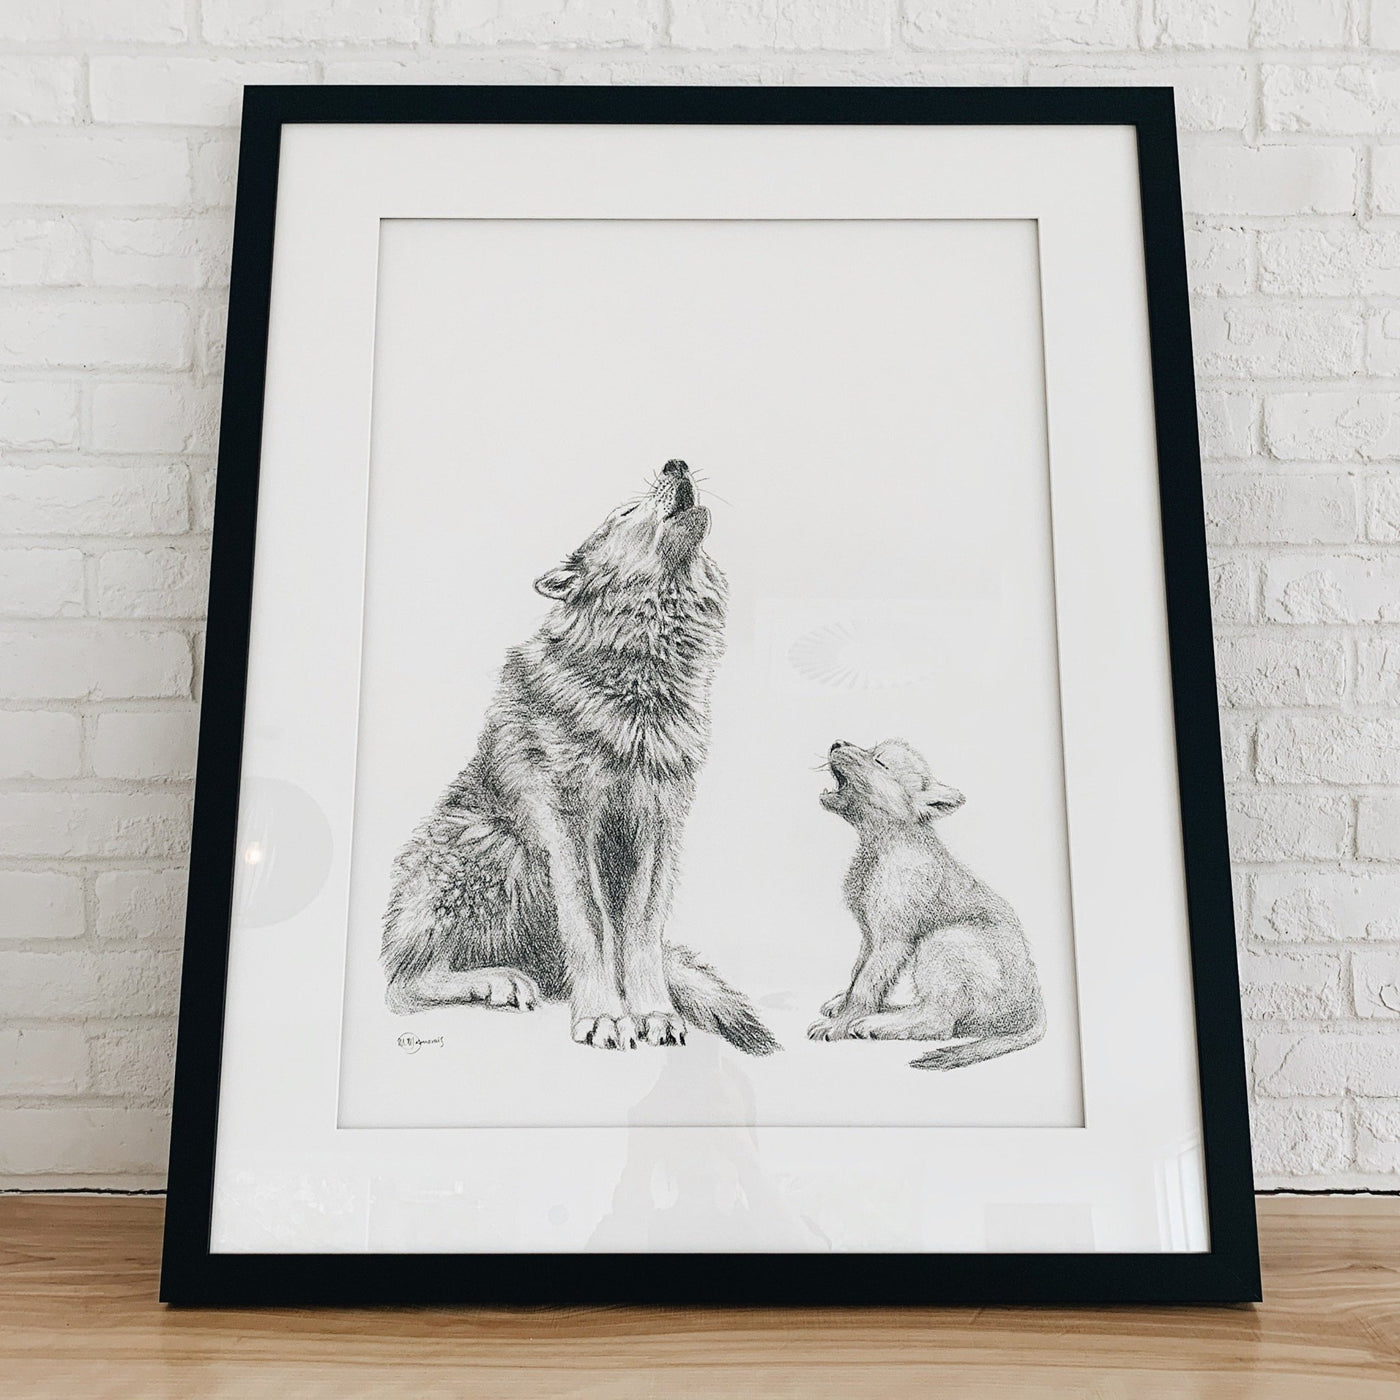 Vendu- Original Artwork of Wolf Howling with Cub Illustration - "Social Animal" Collection - LE NID atelier